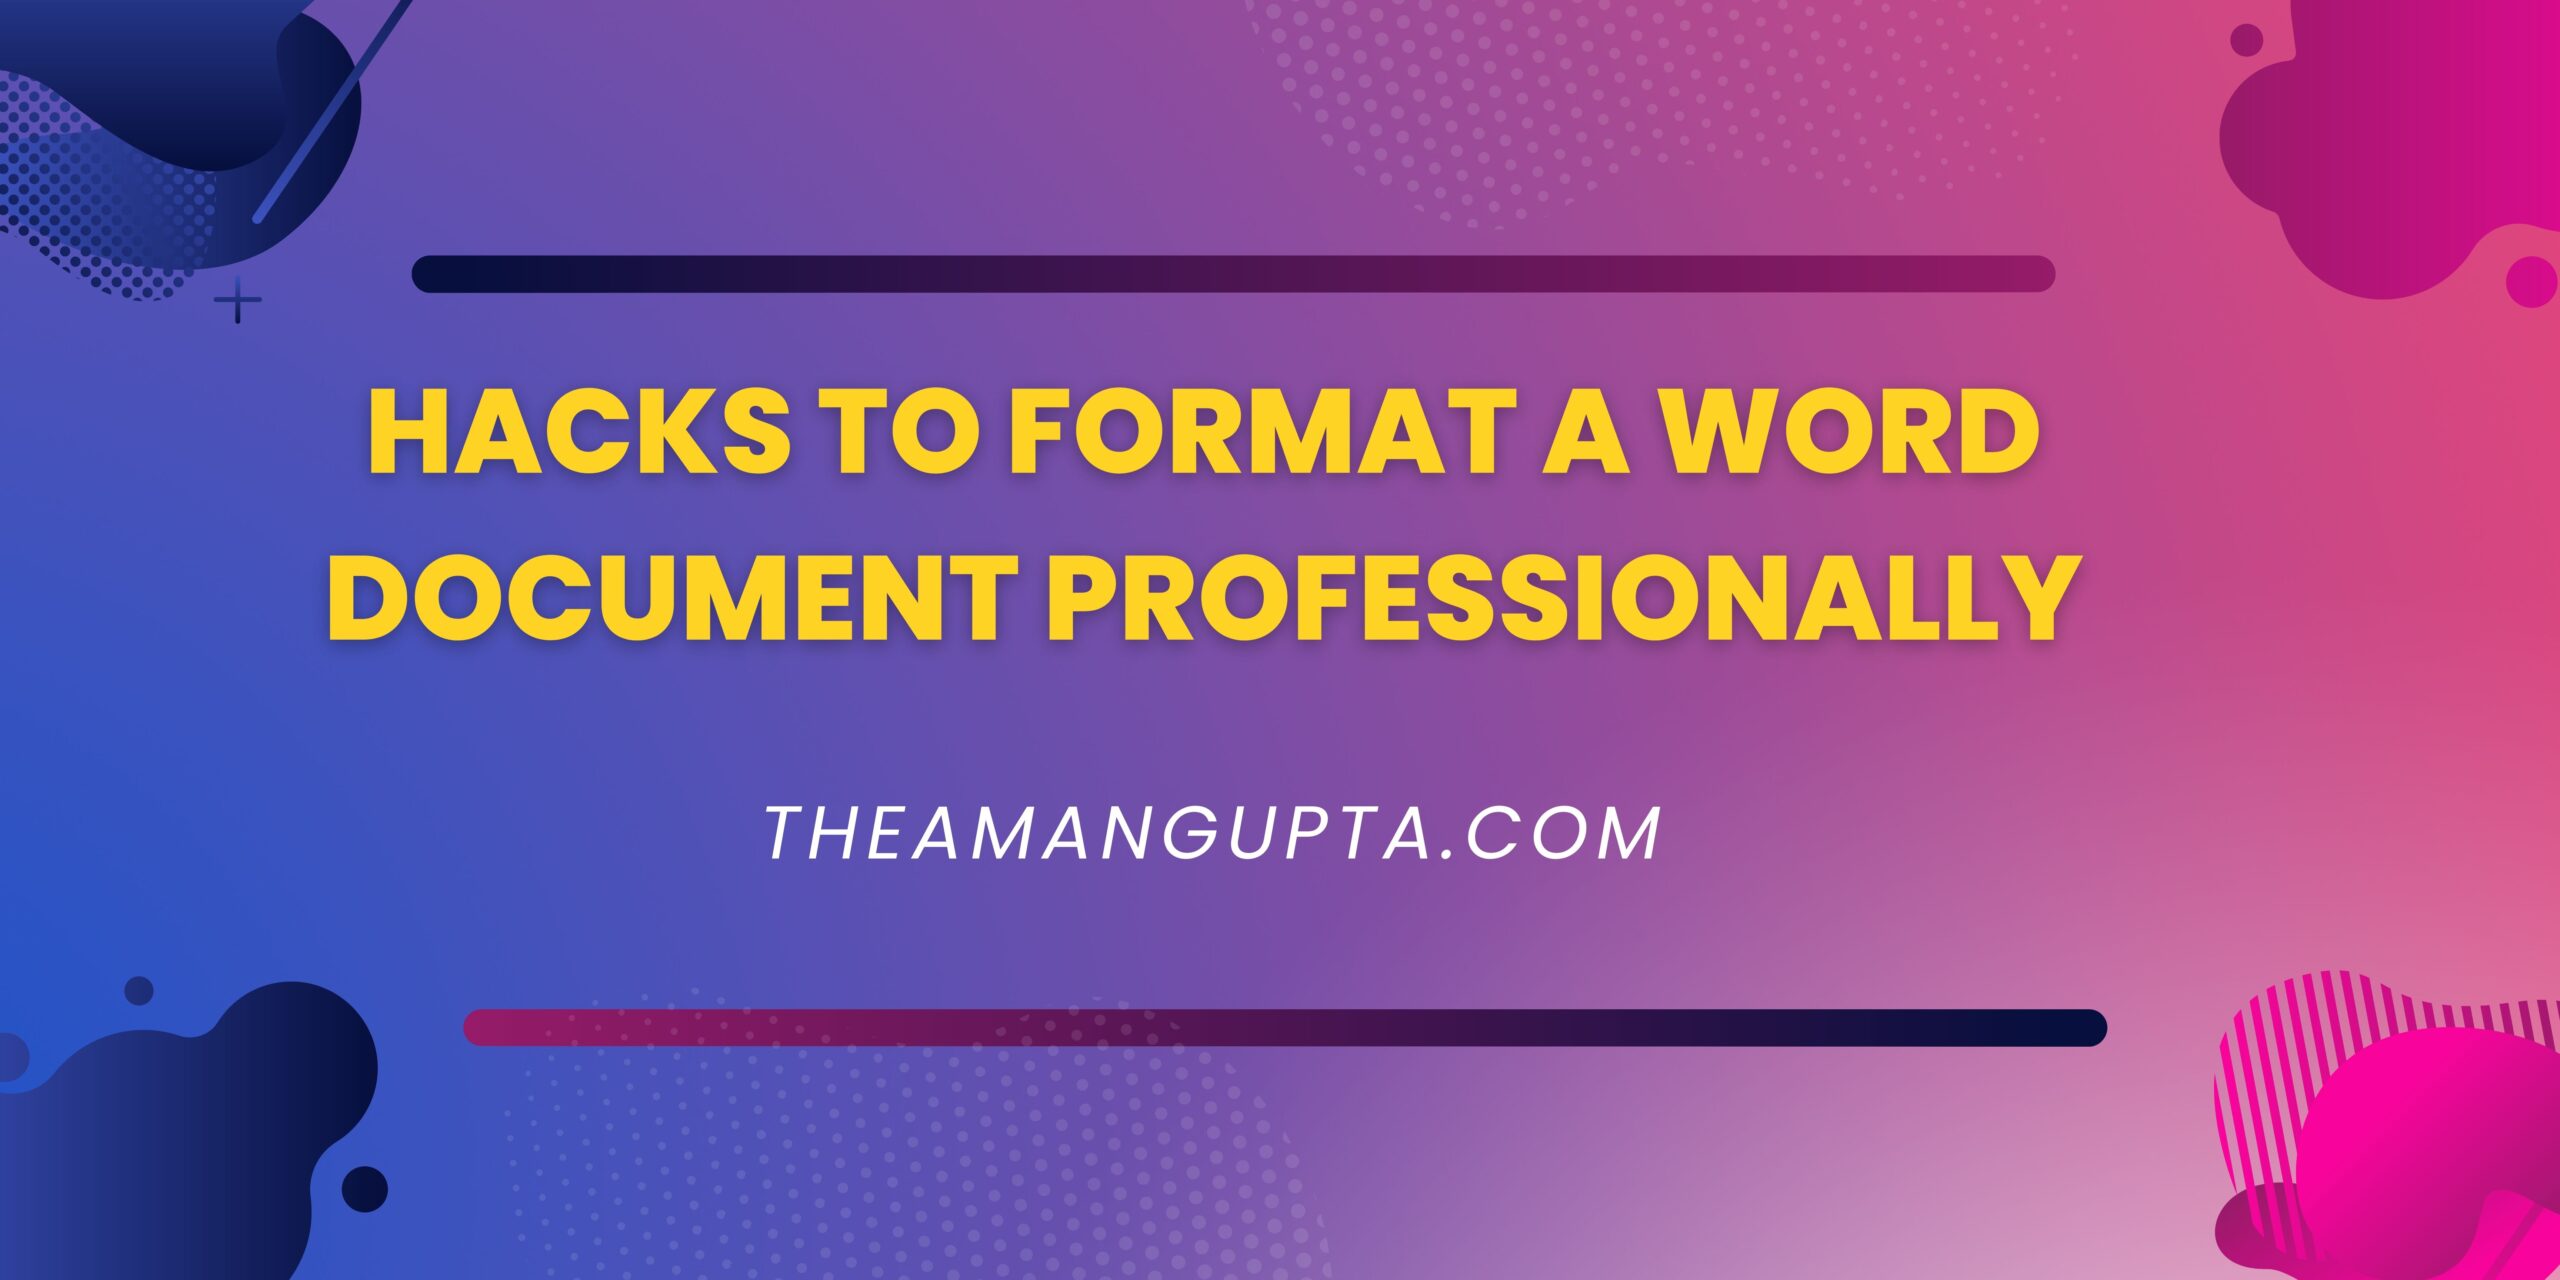 Hacks To Format A Word Document Professionally|Page Size|Tannu Rani|Theamangupta